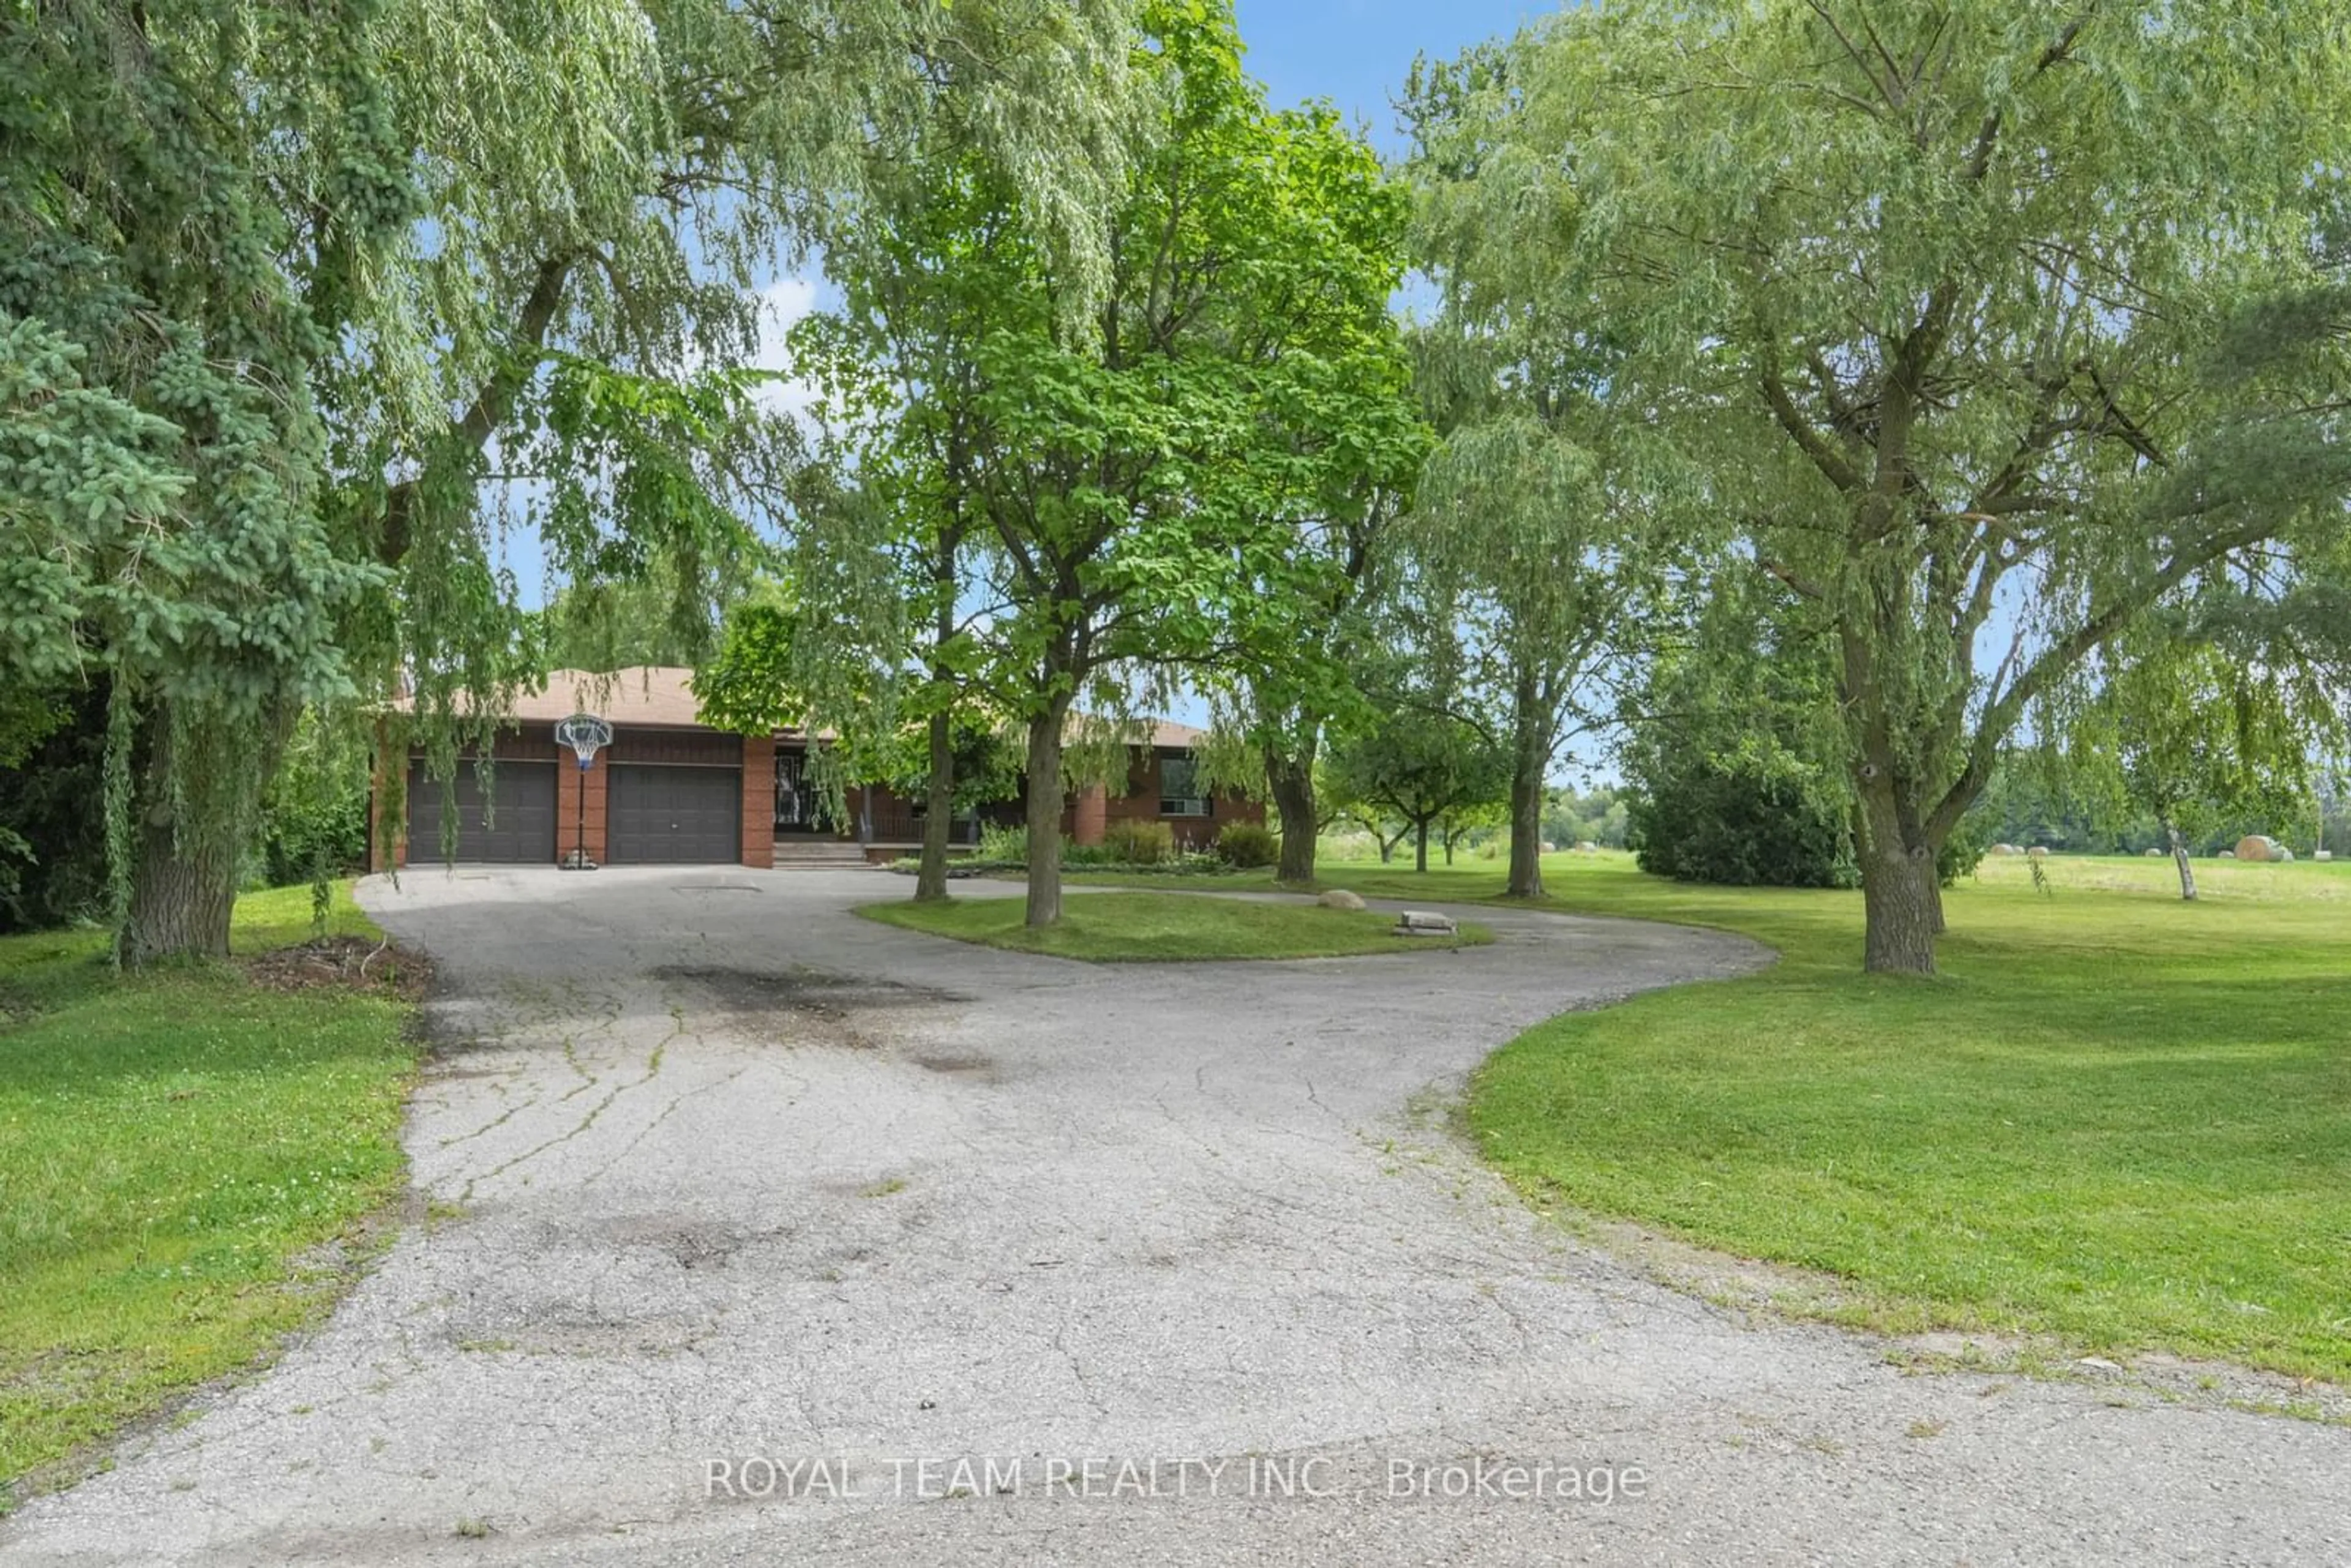 Street view for 13595 Centreville Creek Rd, Caledon Ontario L7C 3B9